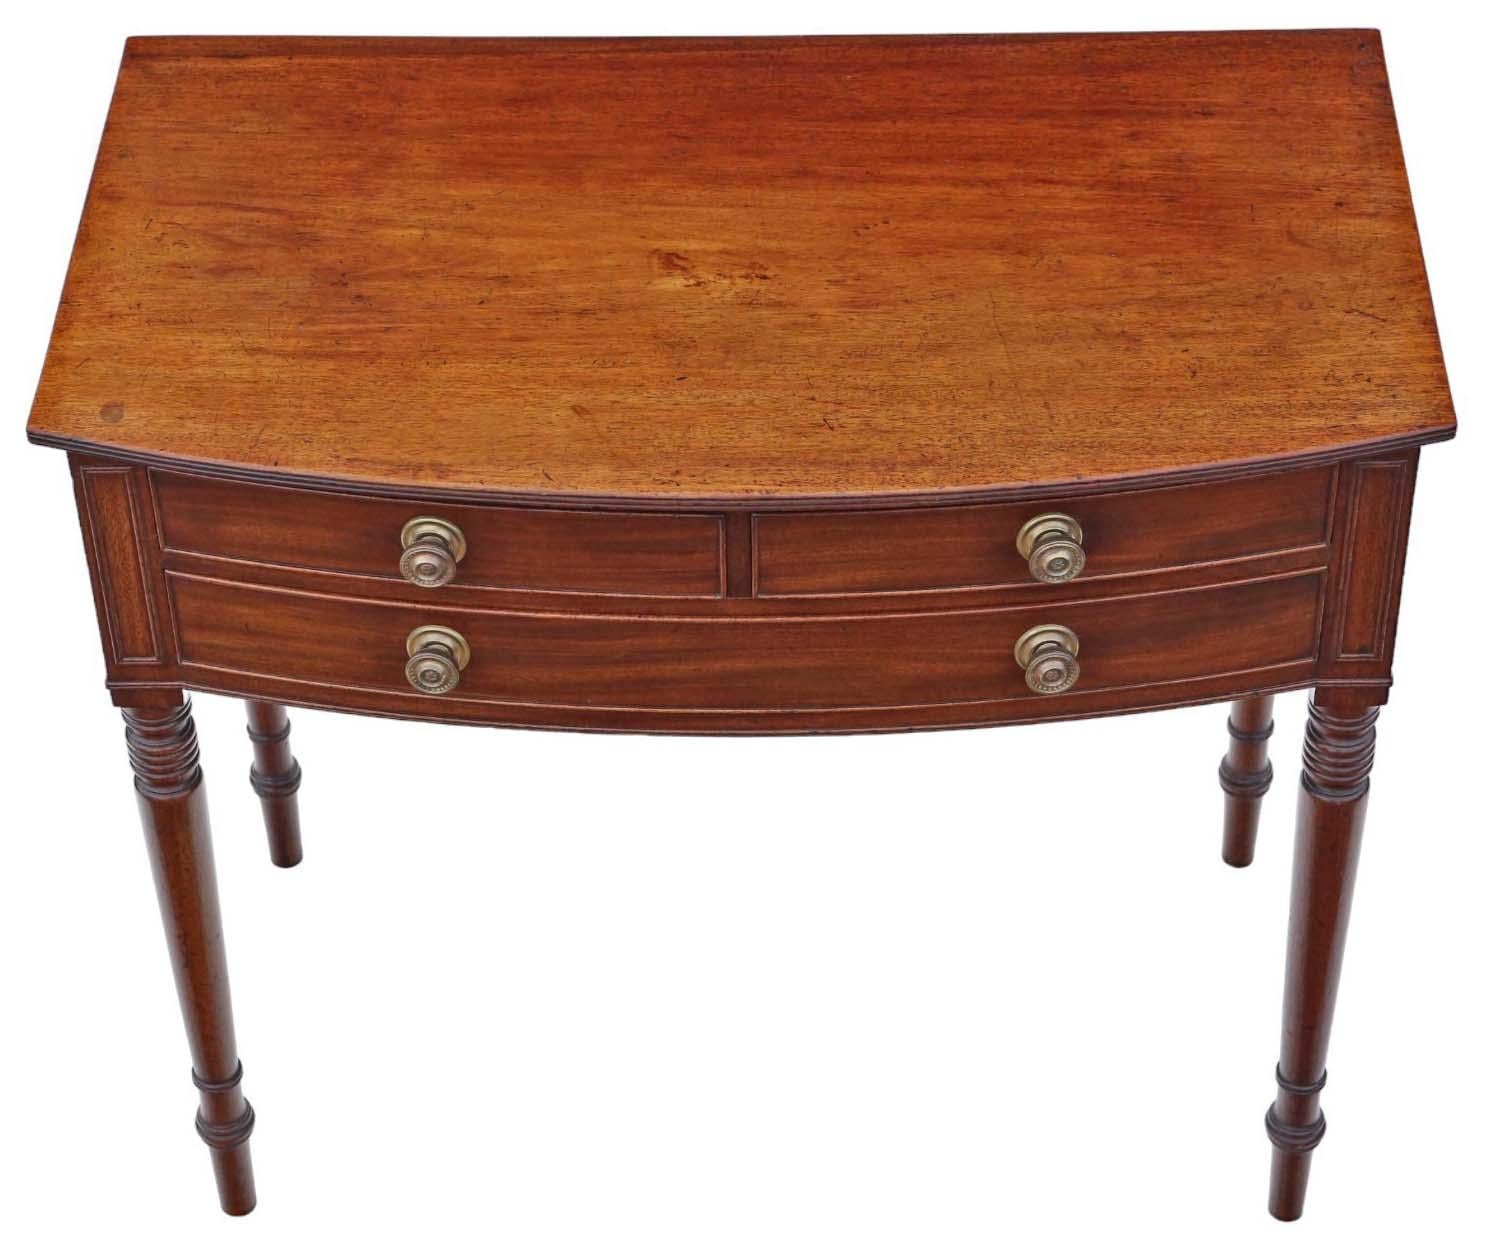 Antique 19th Century Georgian Mahogany Writing Table Desk Side Dressing Bed In Good Condition For Sale In Wisbech, Cambridgeshire